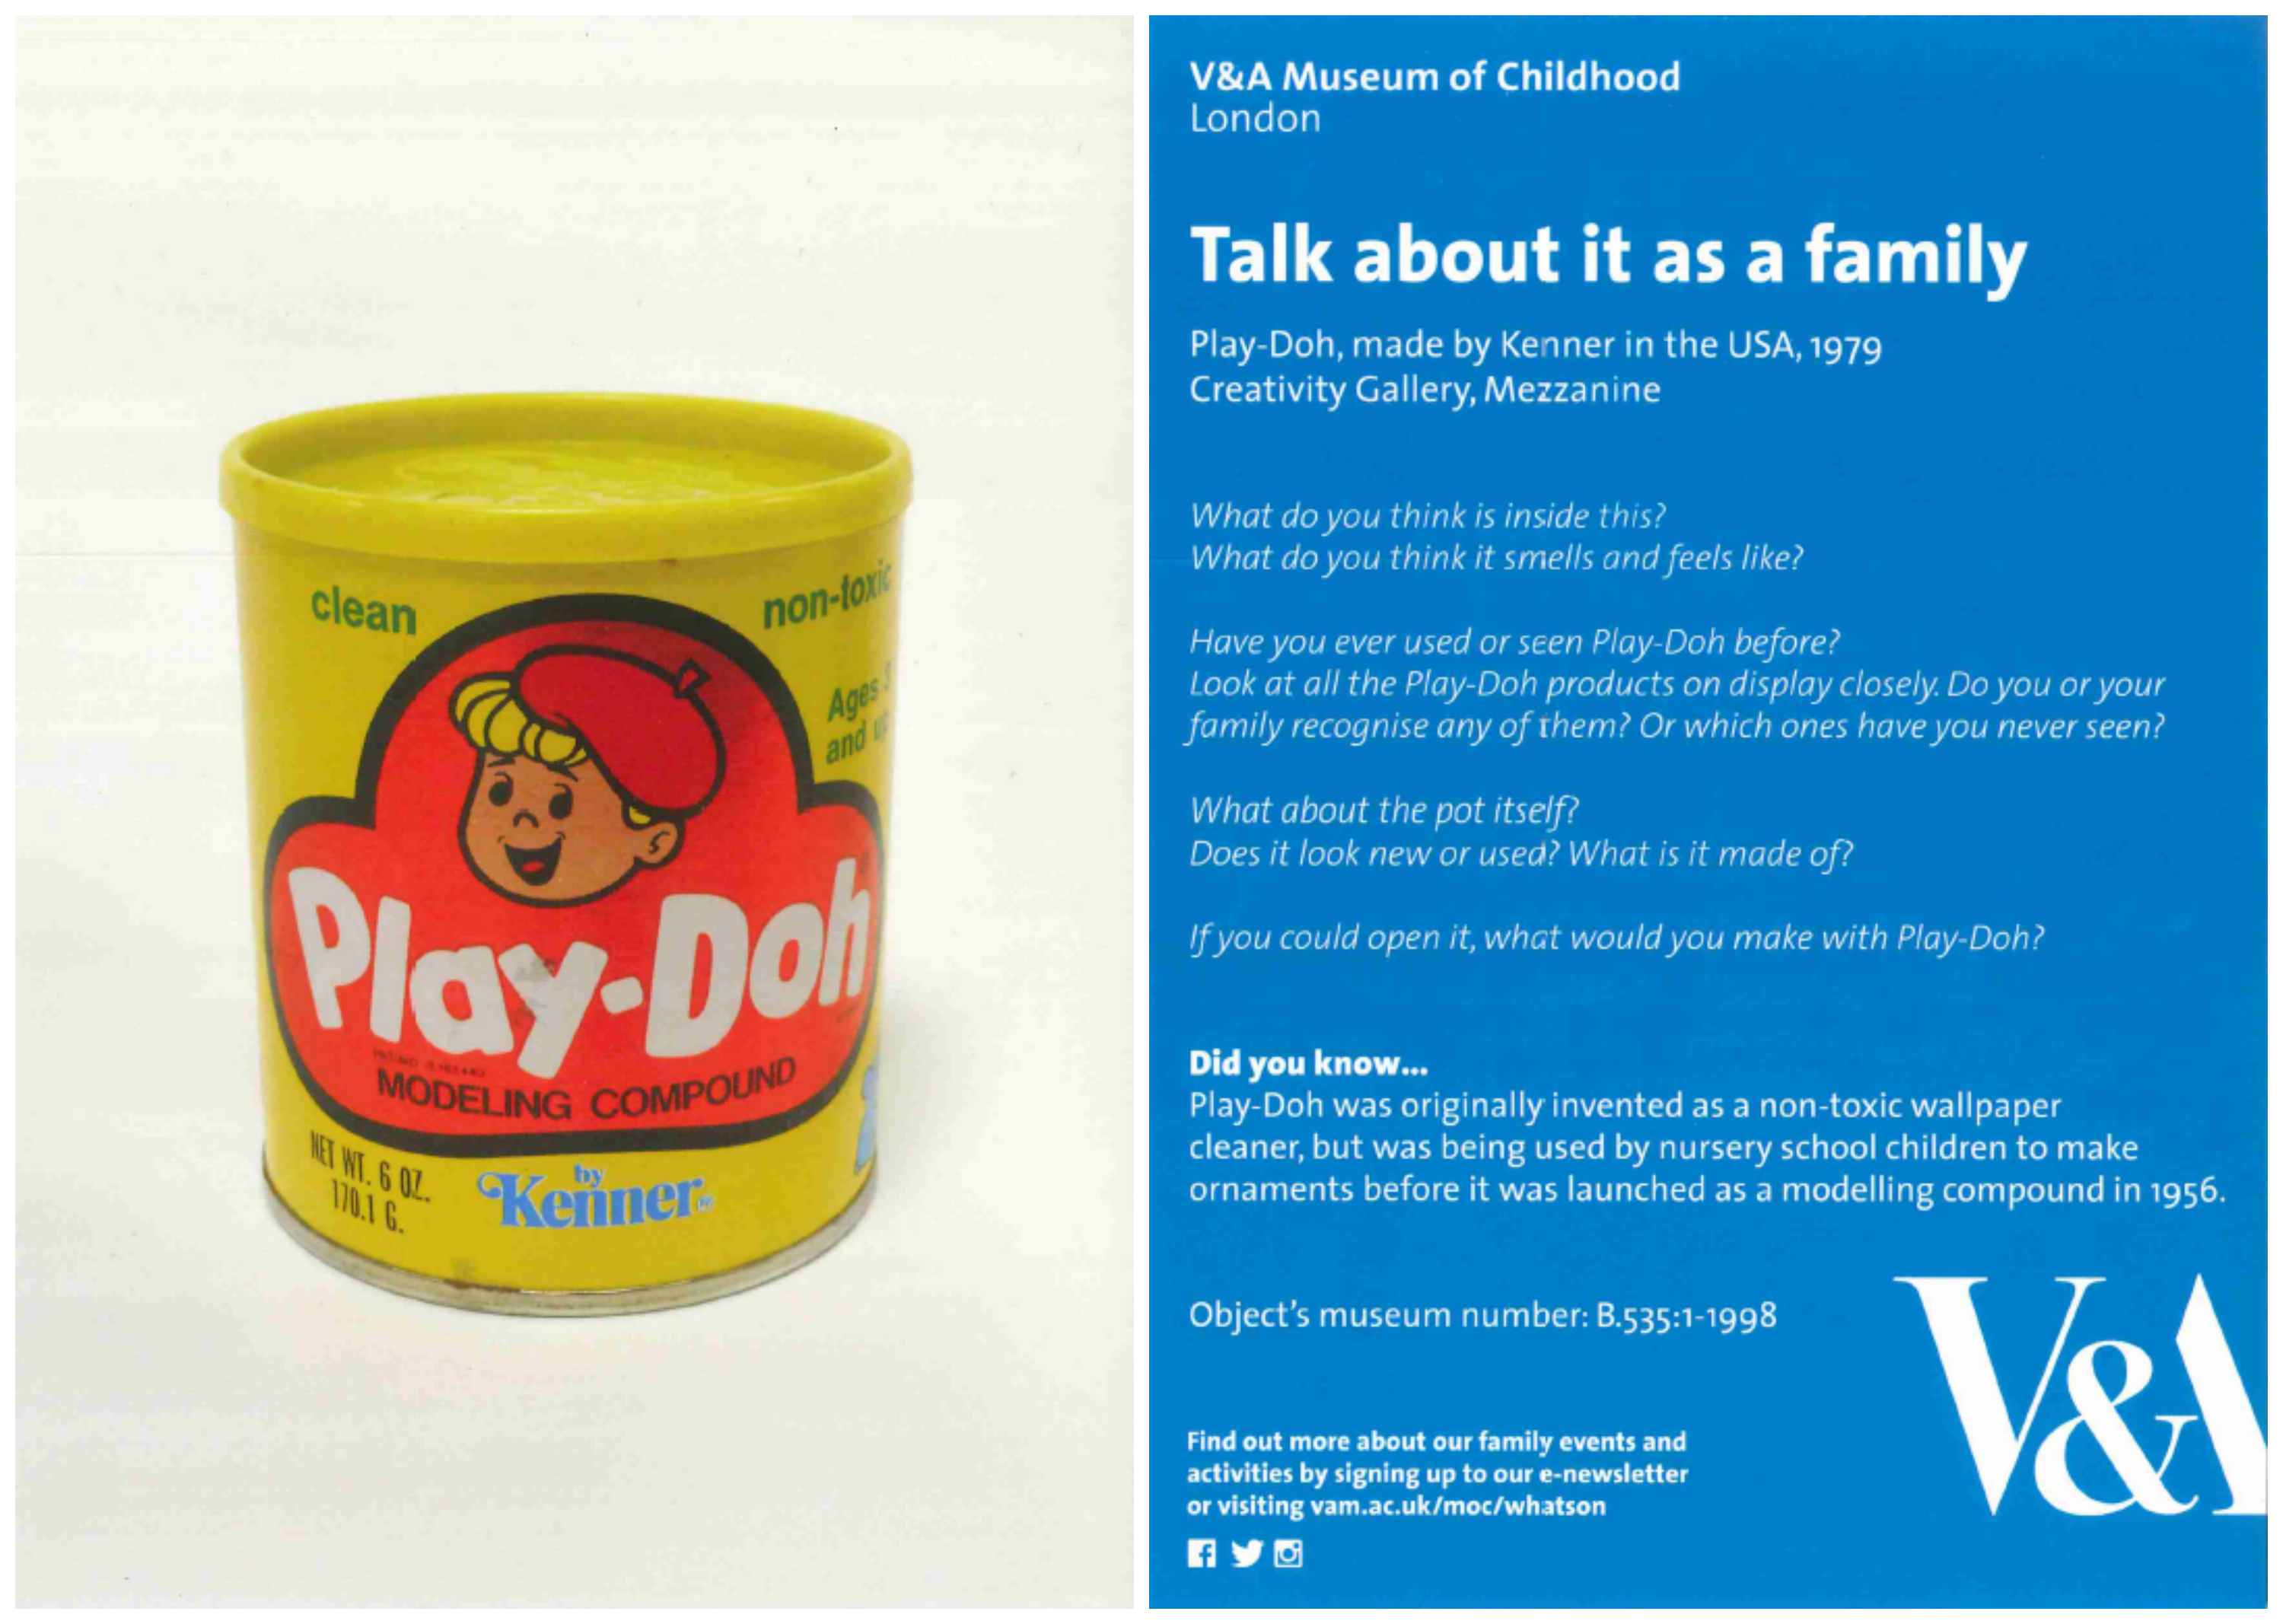 V&A Museum of Childhood image of Play-Doh with 'talk about it as a family' plaque including questions such as 'What do you think it smells and feels like?, 'If you could open it, what would you make with Play-Doh?'